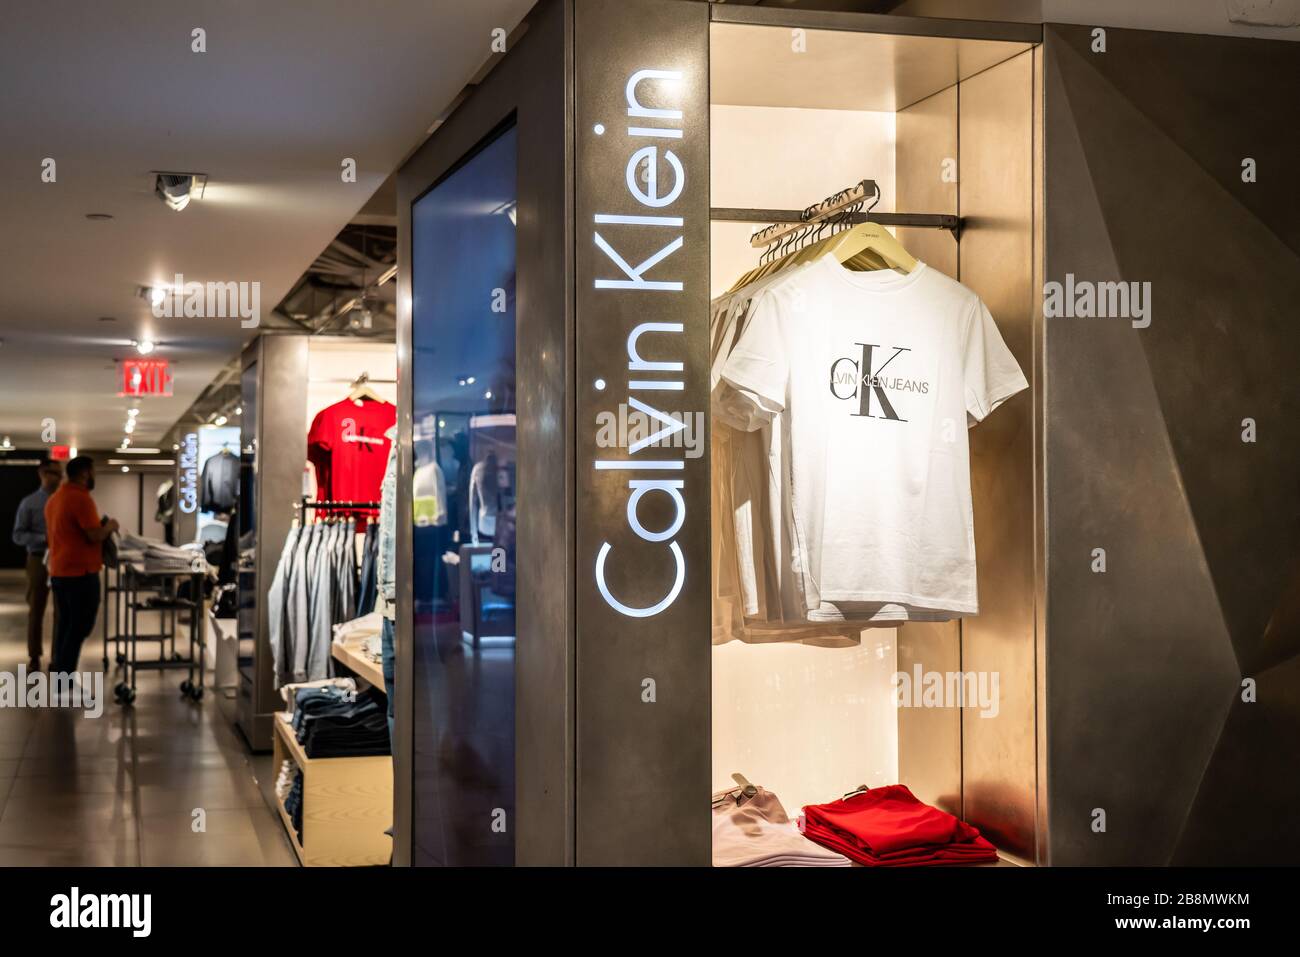 Calvin Klein Store High Resolution Stock Photography and Images - Alamy